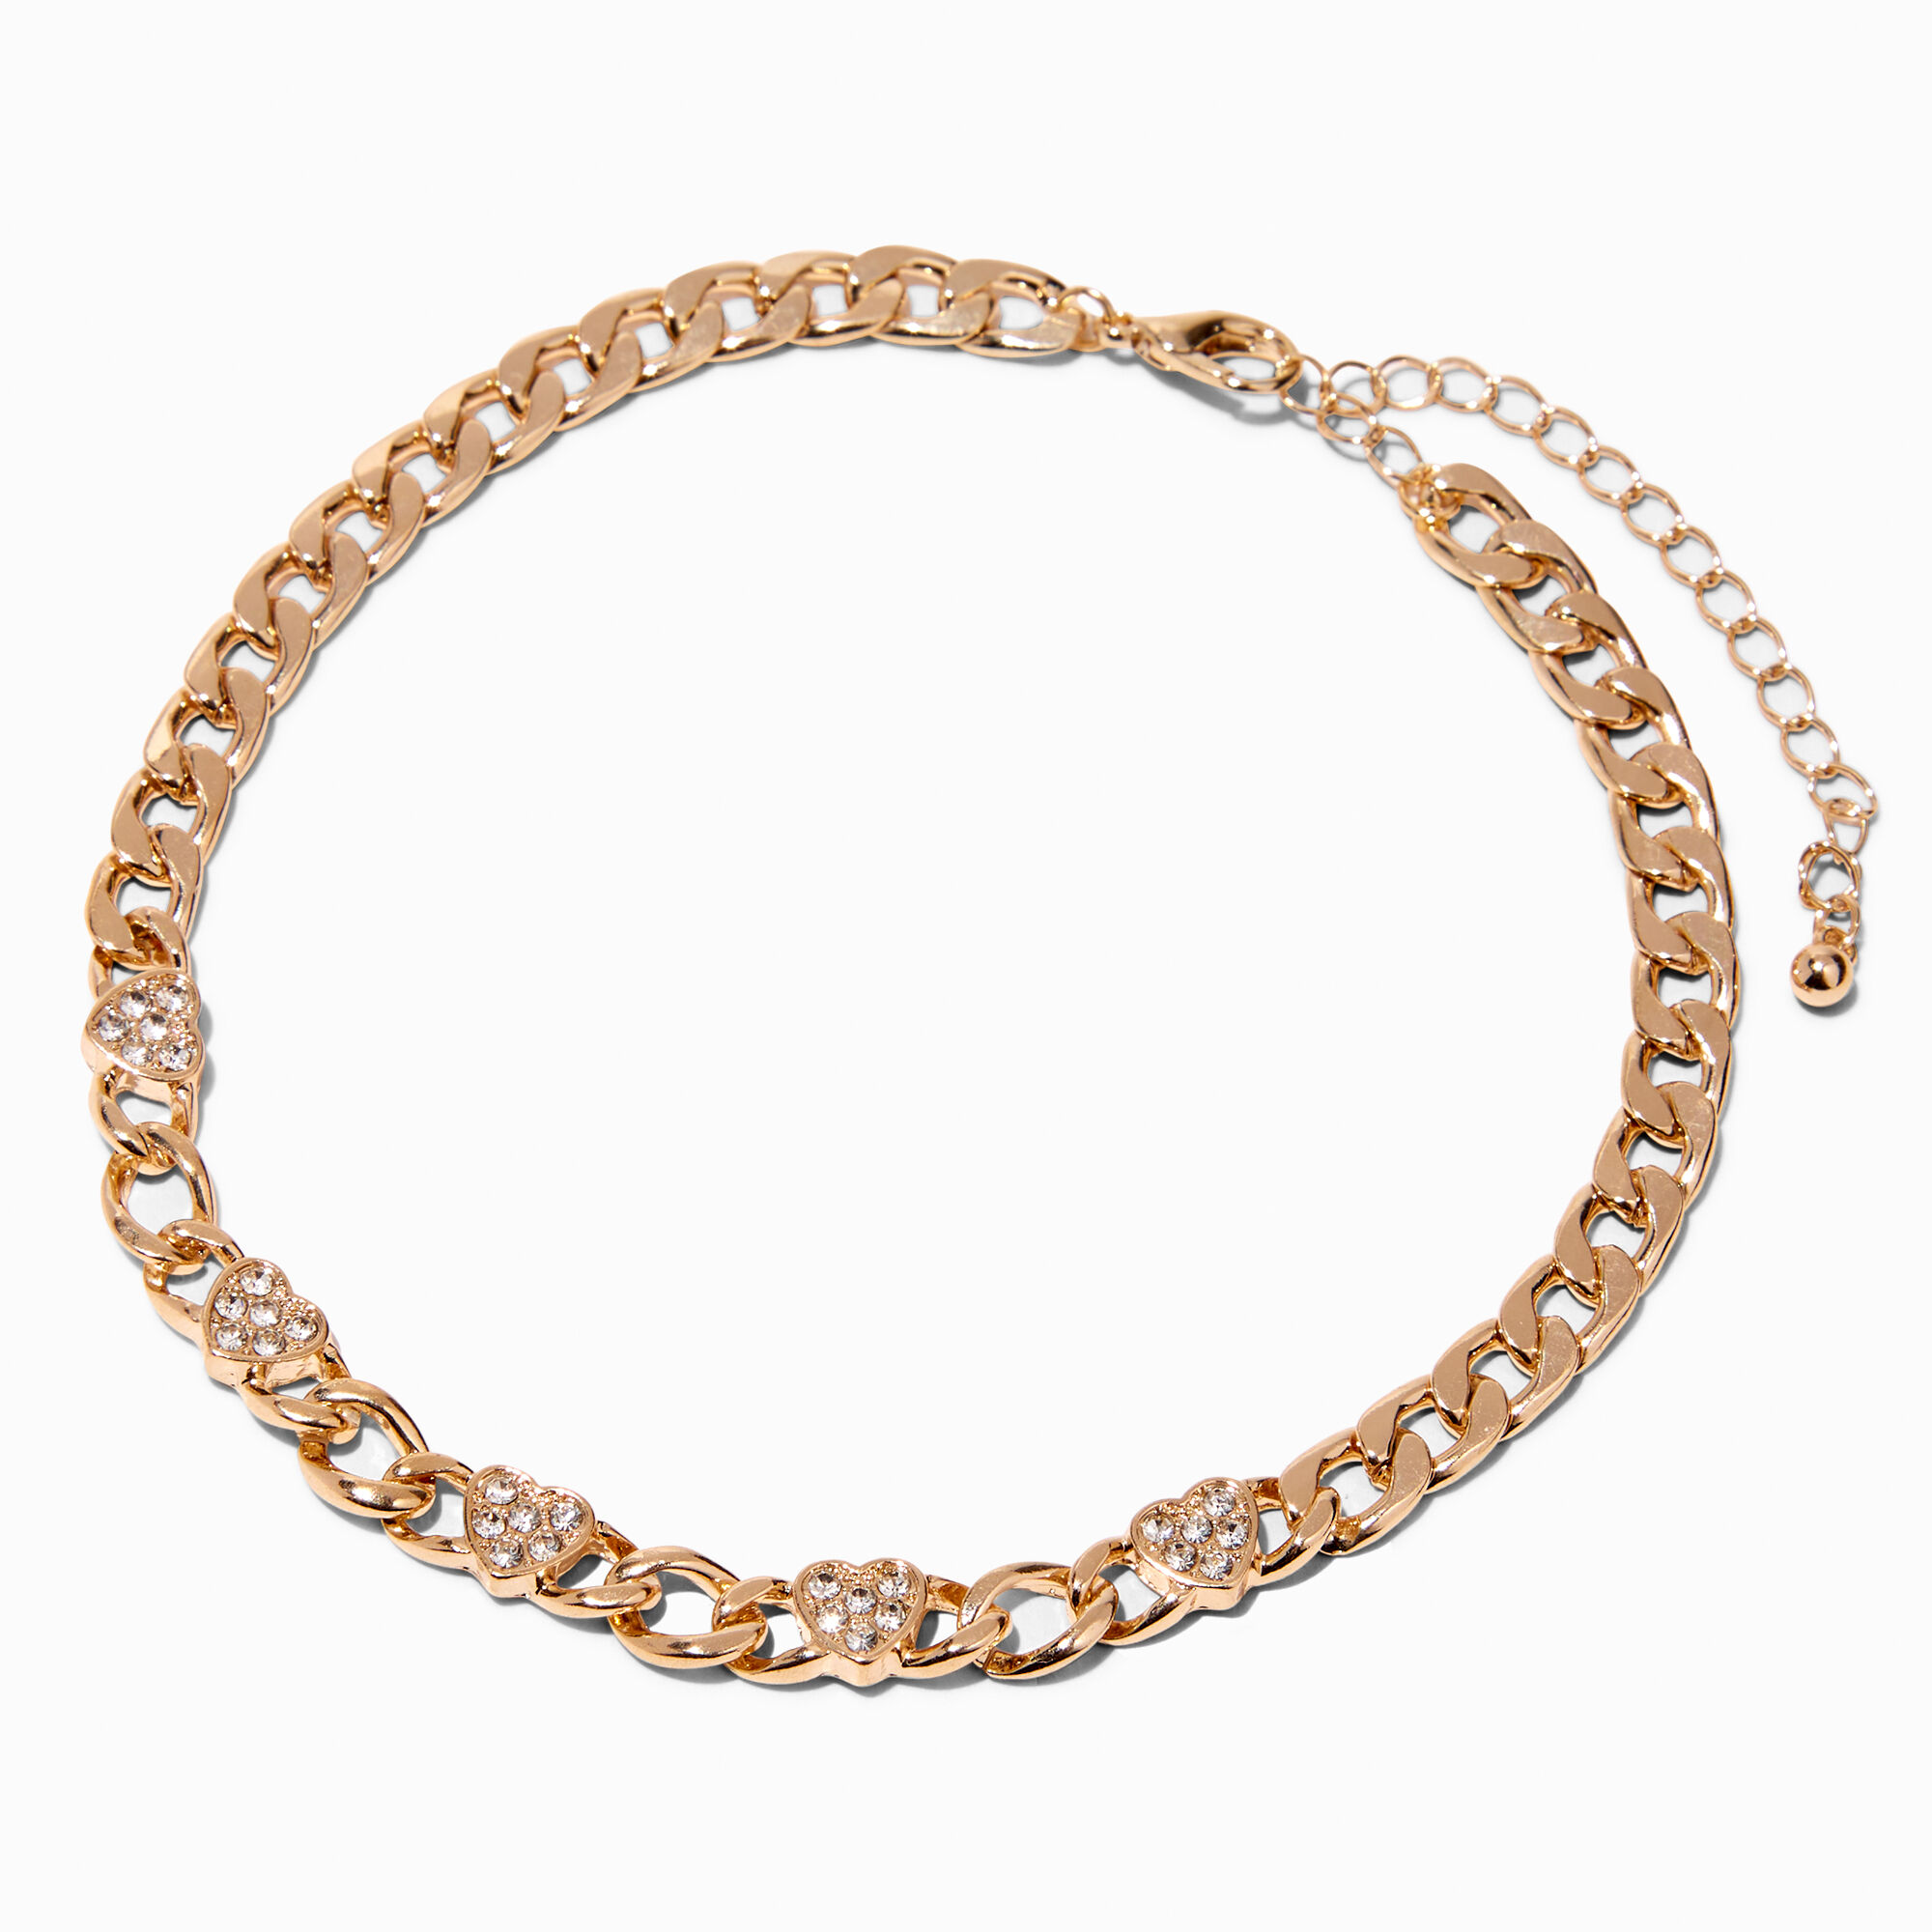 View Claires Club Heart Chainlink Necklace Bracelet Gold information